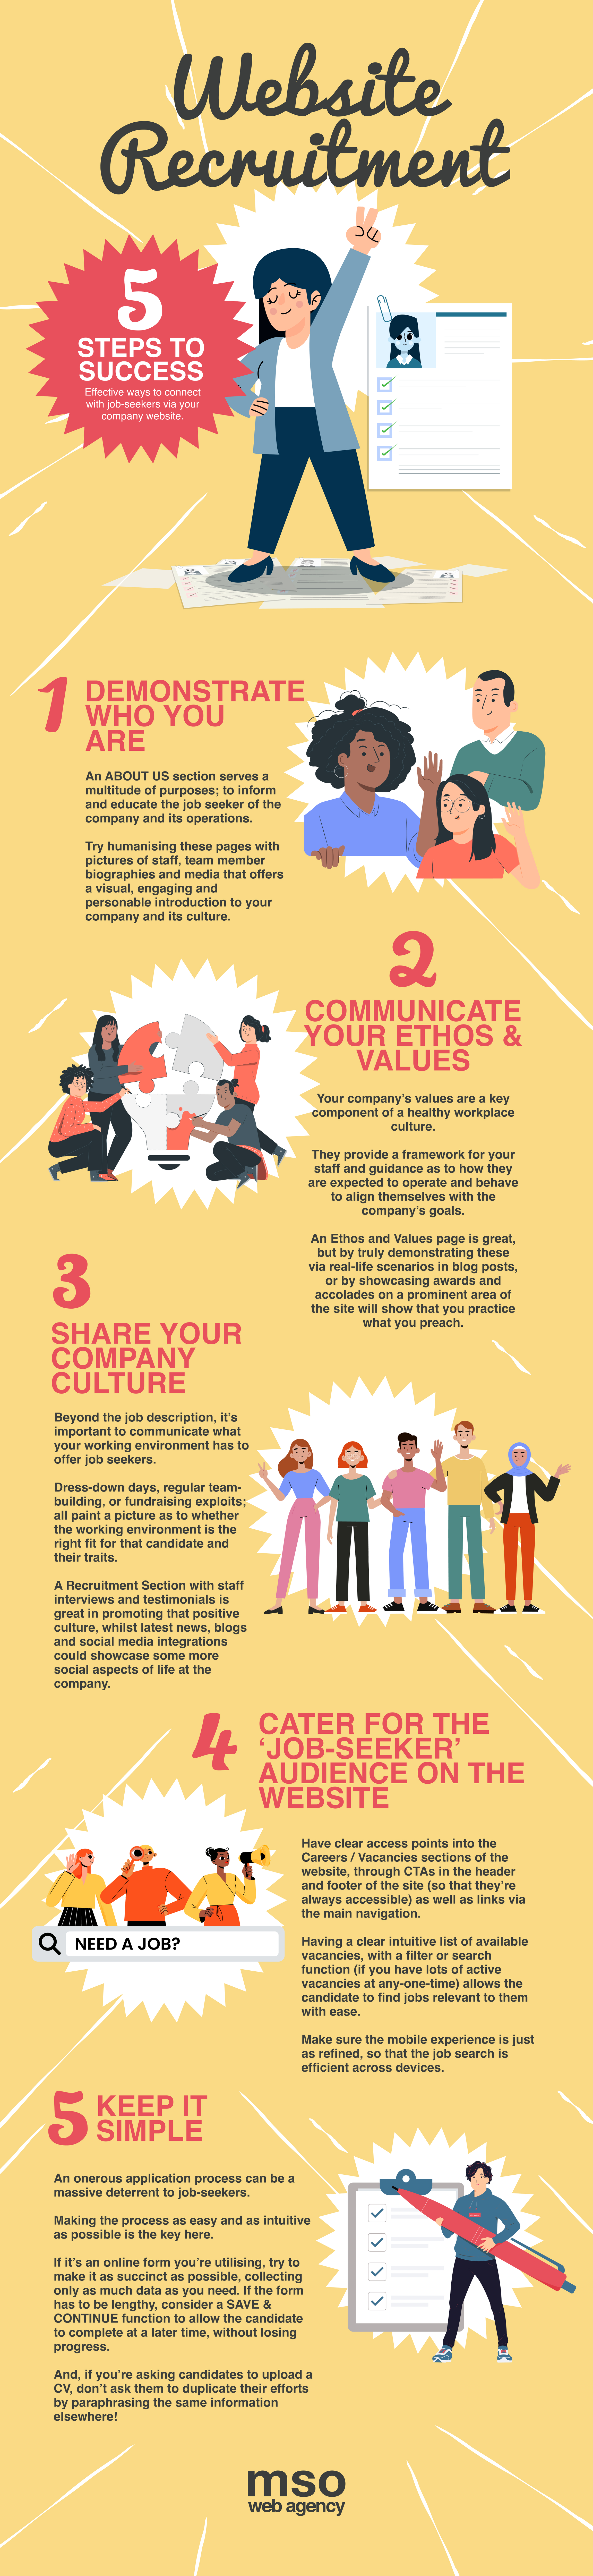 Infographic that shows 5 tips on how to achieve success with website recruitment.